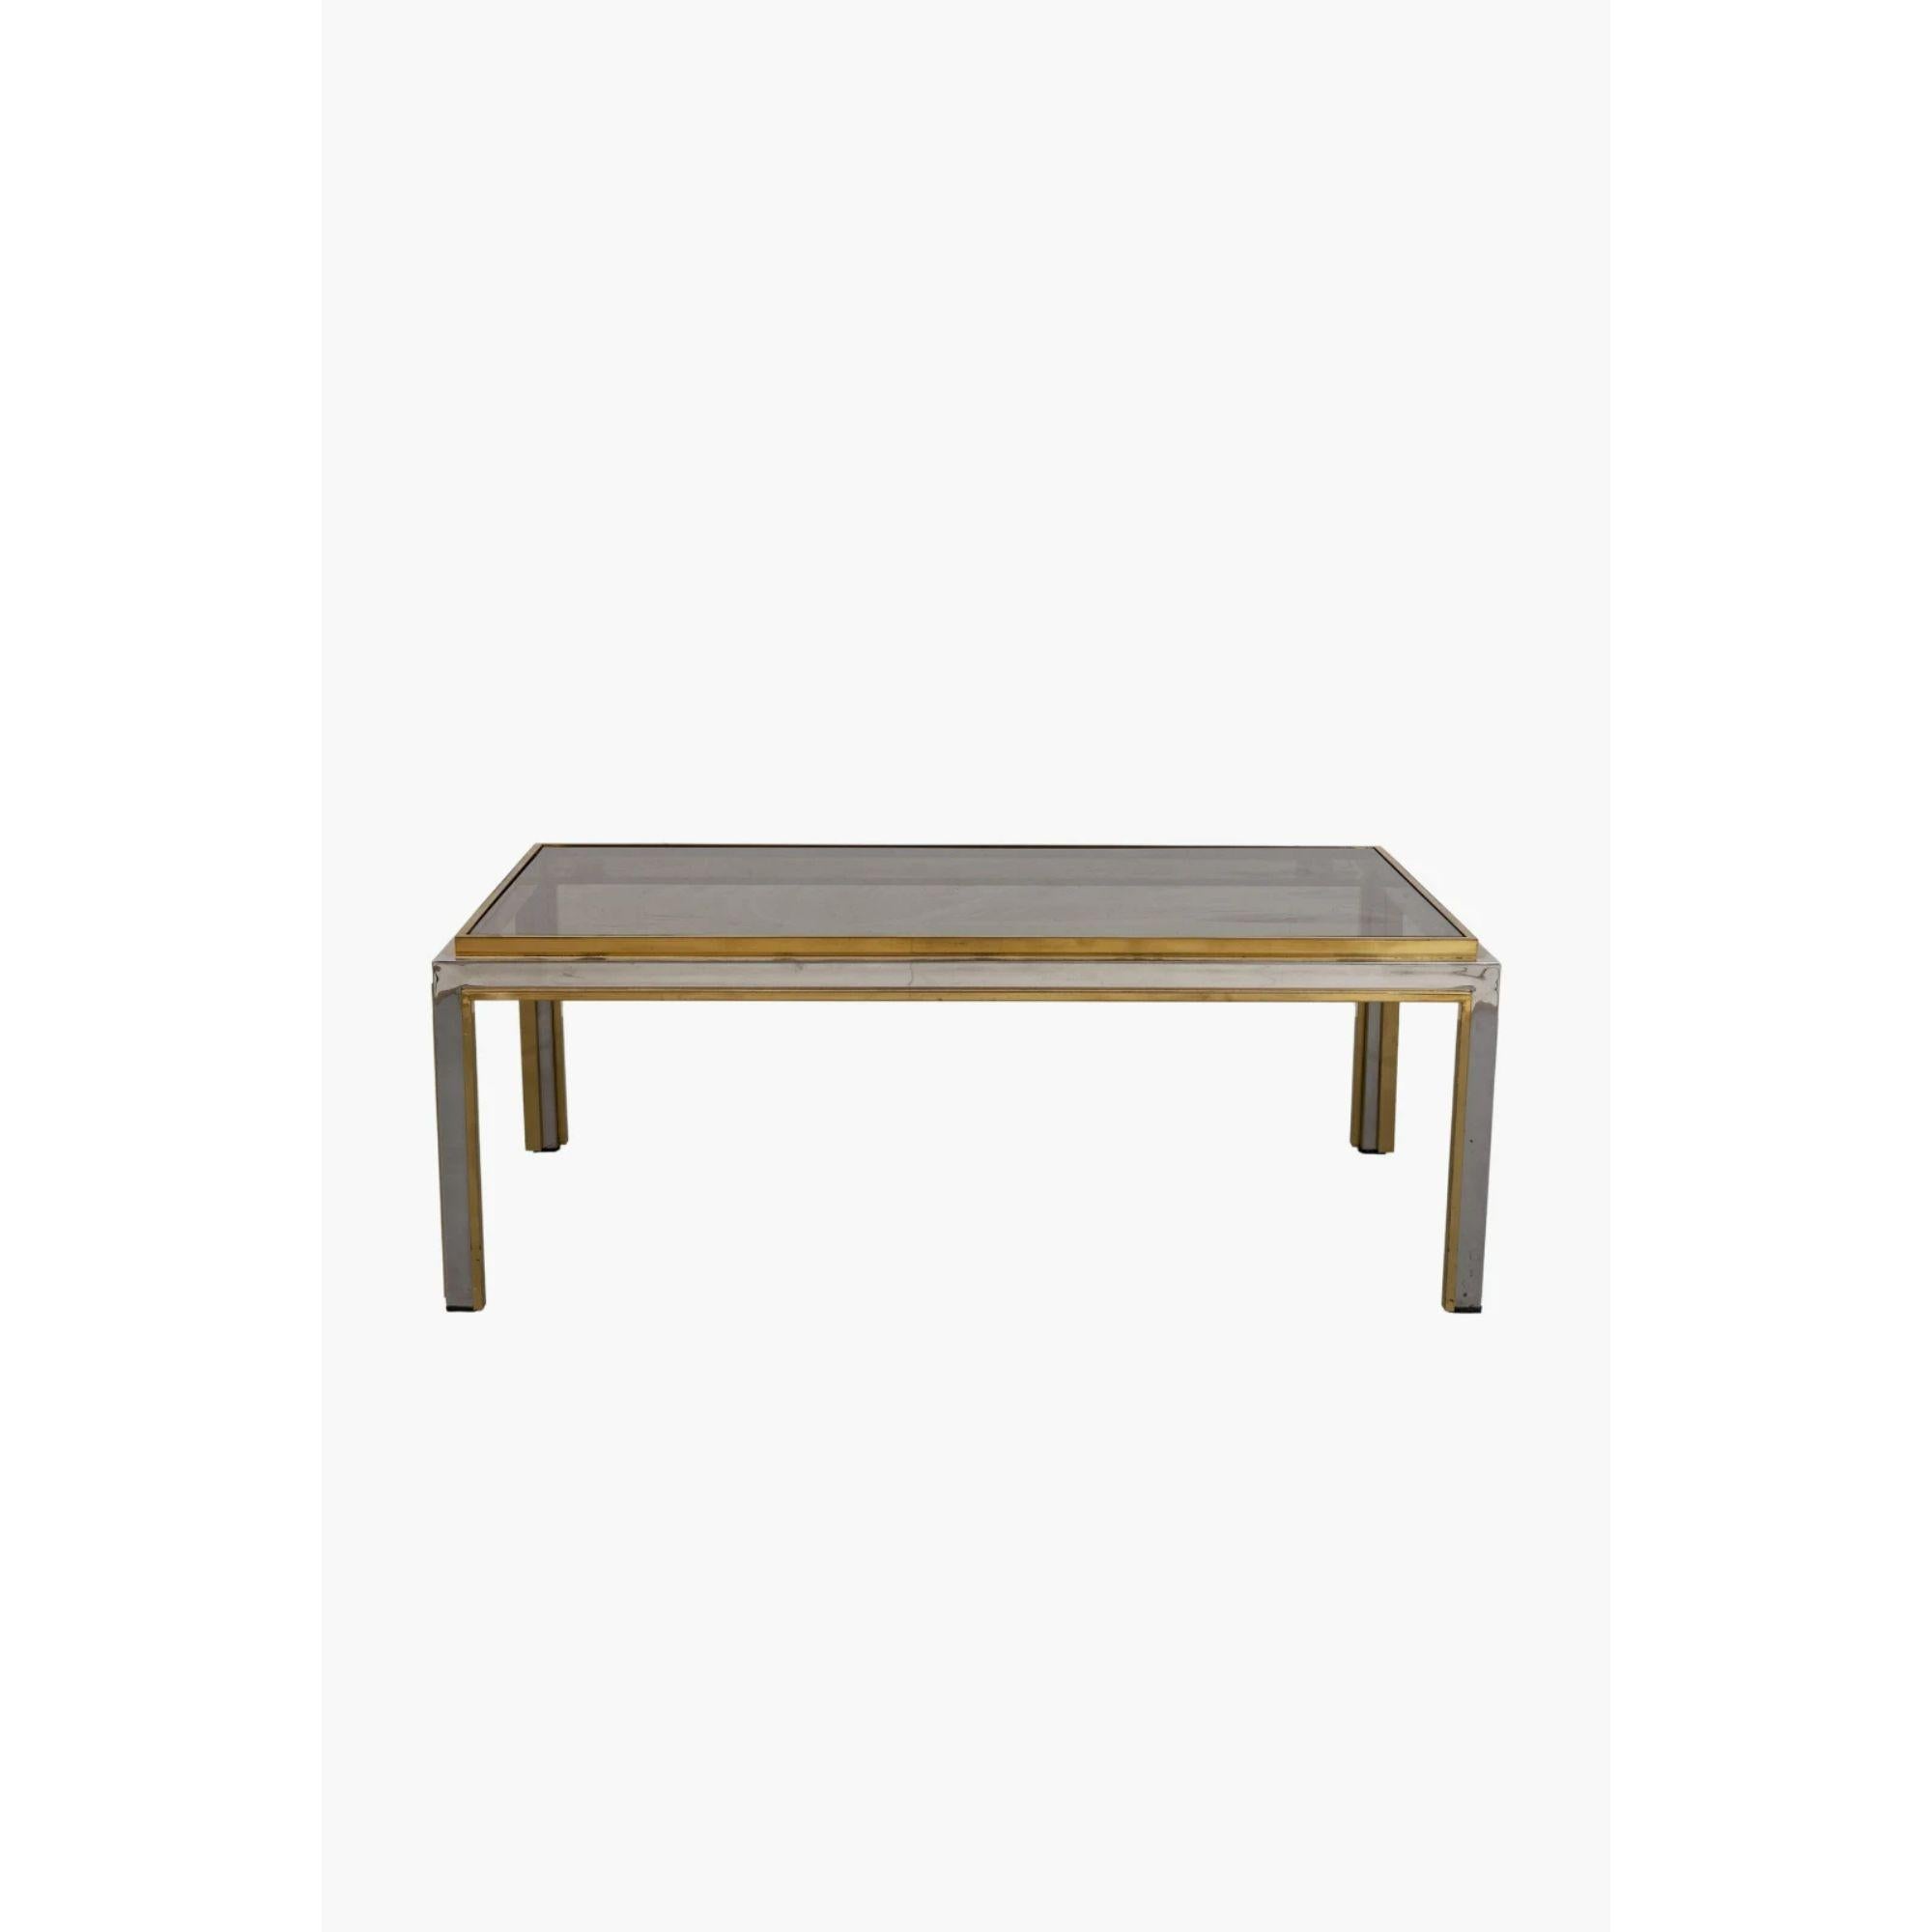 Chrome and brass coffee table by Romeo Rega, 1970s

1970s Italian brass and chrome coffee table with smoked glass top by Romeo Rega.

Dimensions: 41 x 110 x 60 cm
Condition: Minor scuffs and scratches to the polished finish commensurate with